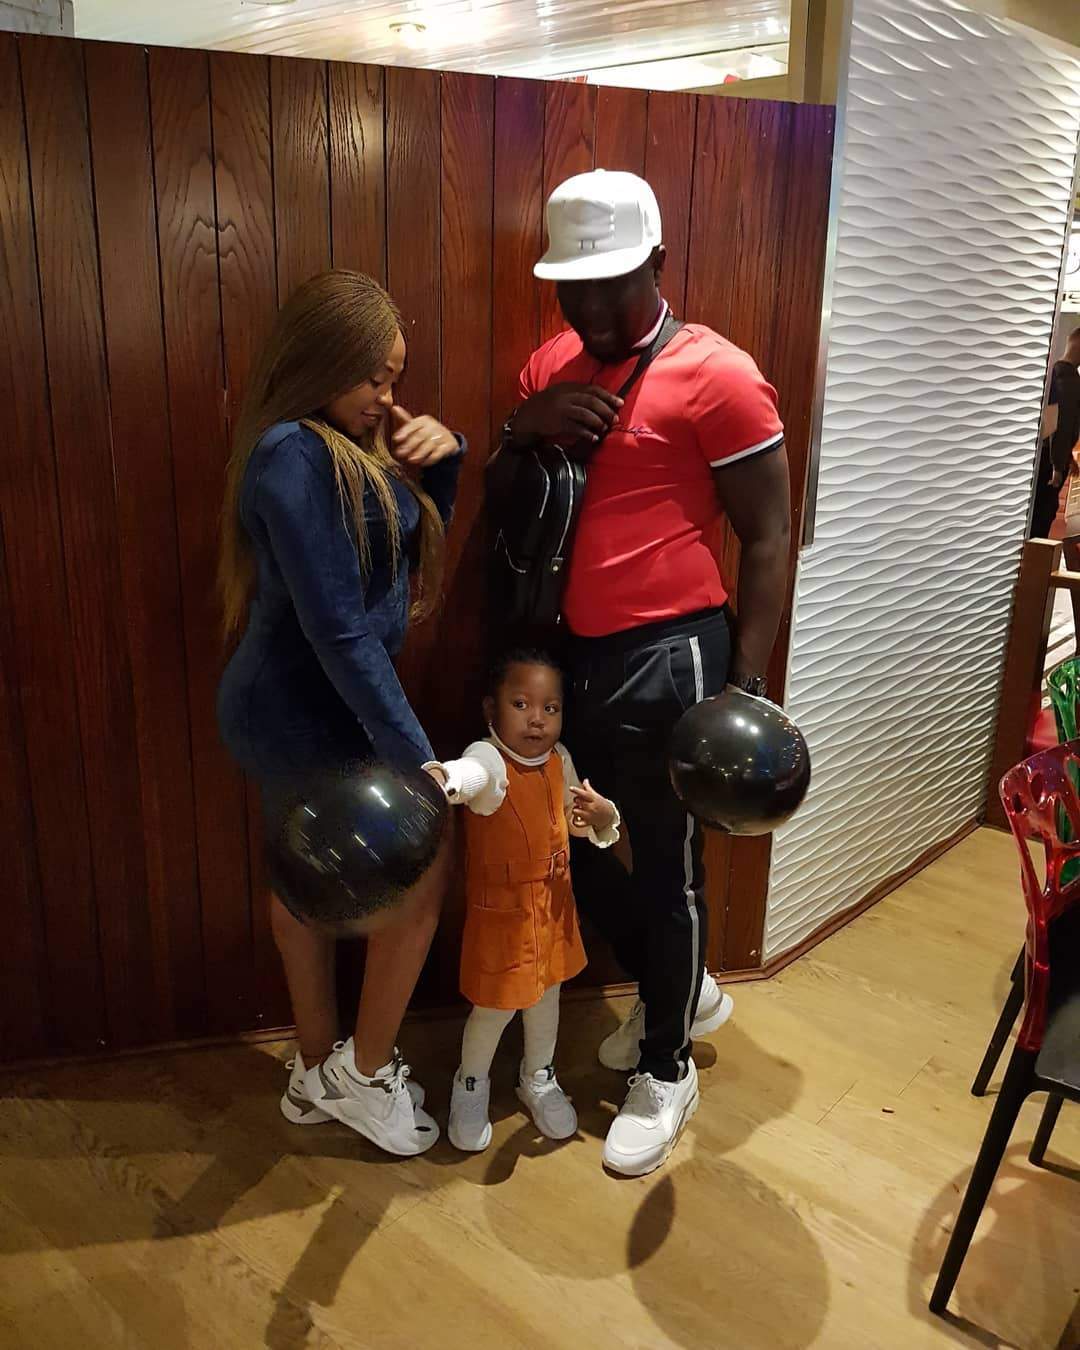 'Great Night Out' - Seyi Law Shares Cute Photos With His Wife And Daughter